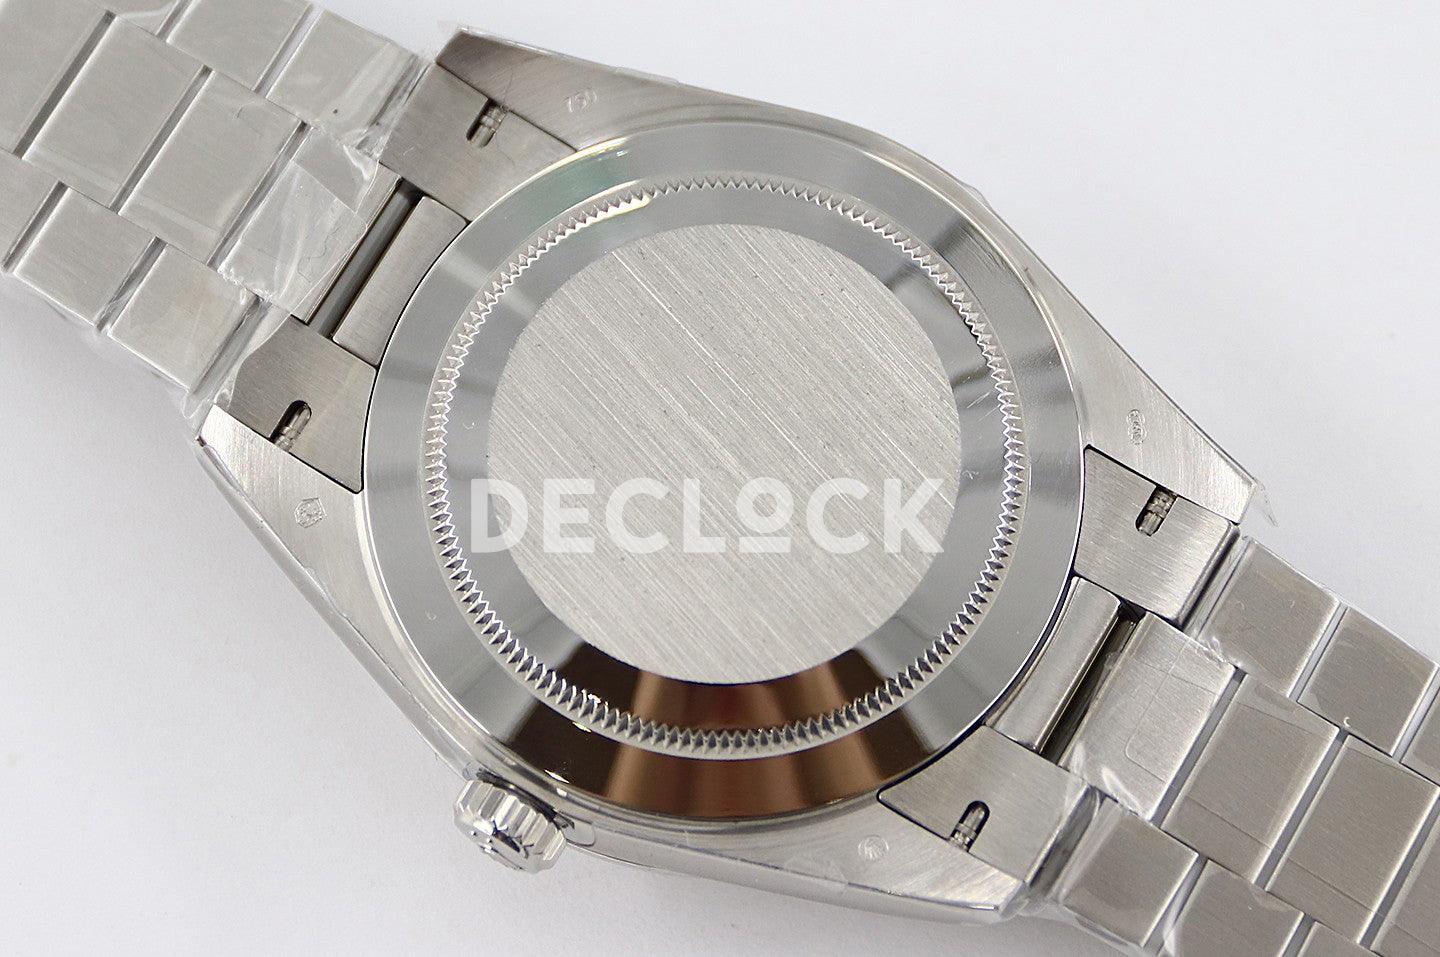 Replica Rolex Day-Date 36/40 228239 Meteorite Dial with Diamond Markers in White Gold - Replica Watches